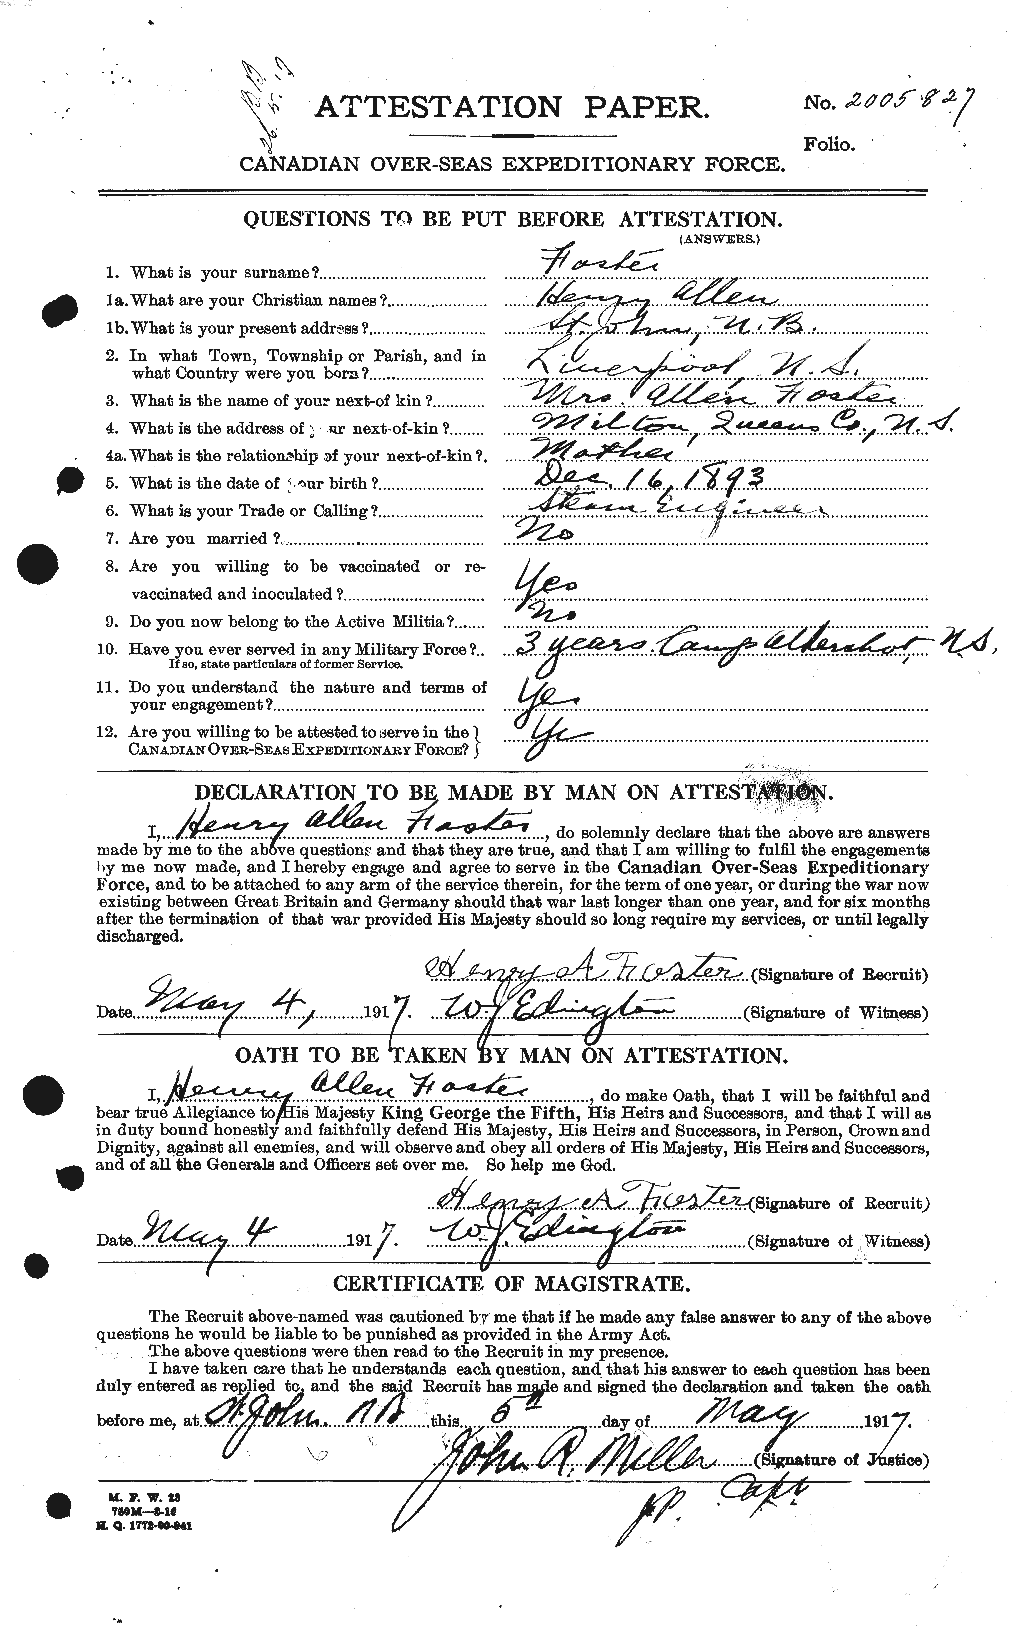 Personnel Records of the First World War - CEF 333247a